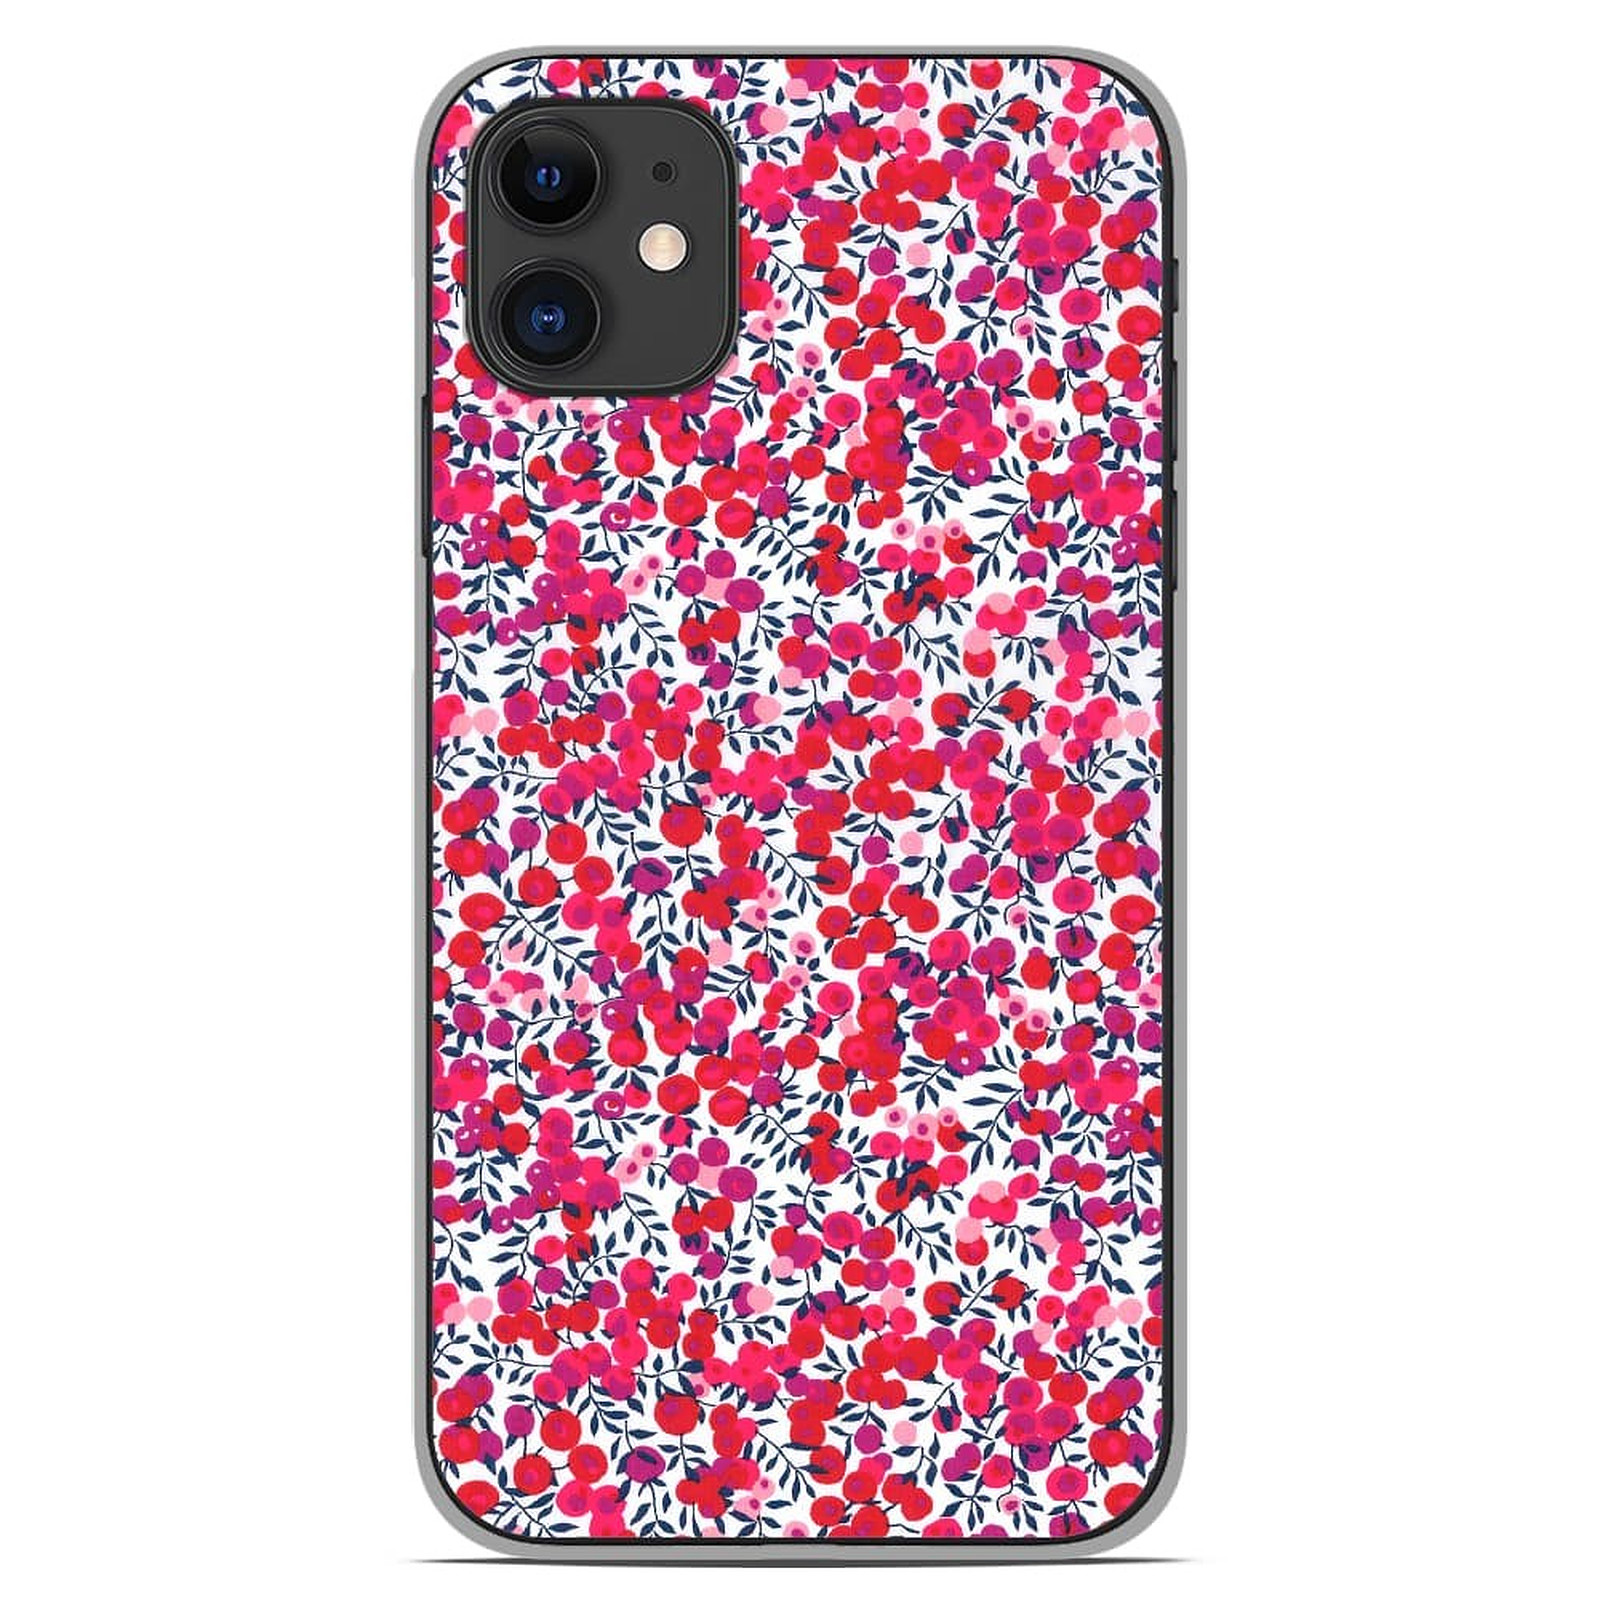 1001 Coques Coque silicone gel Apple iPhone 11 motif Liberty Wiltshire Rouge - Coque telephone 1001Coques